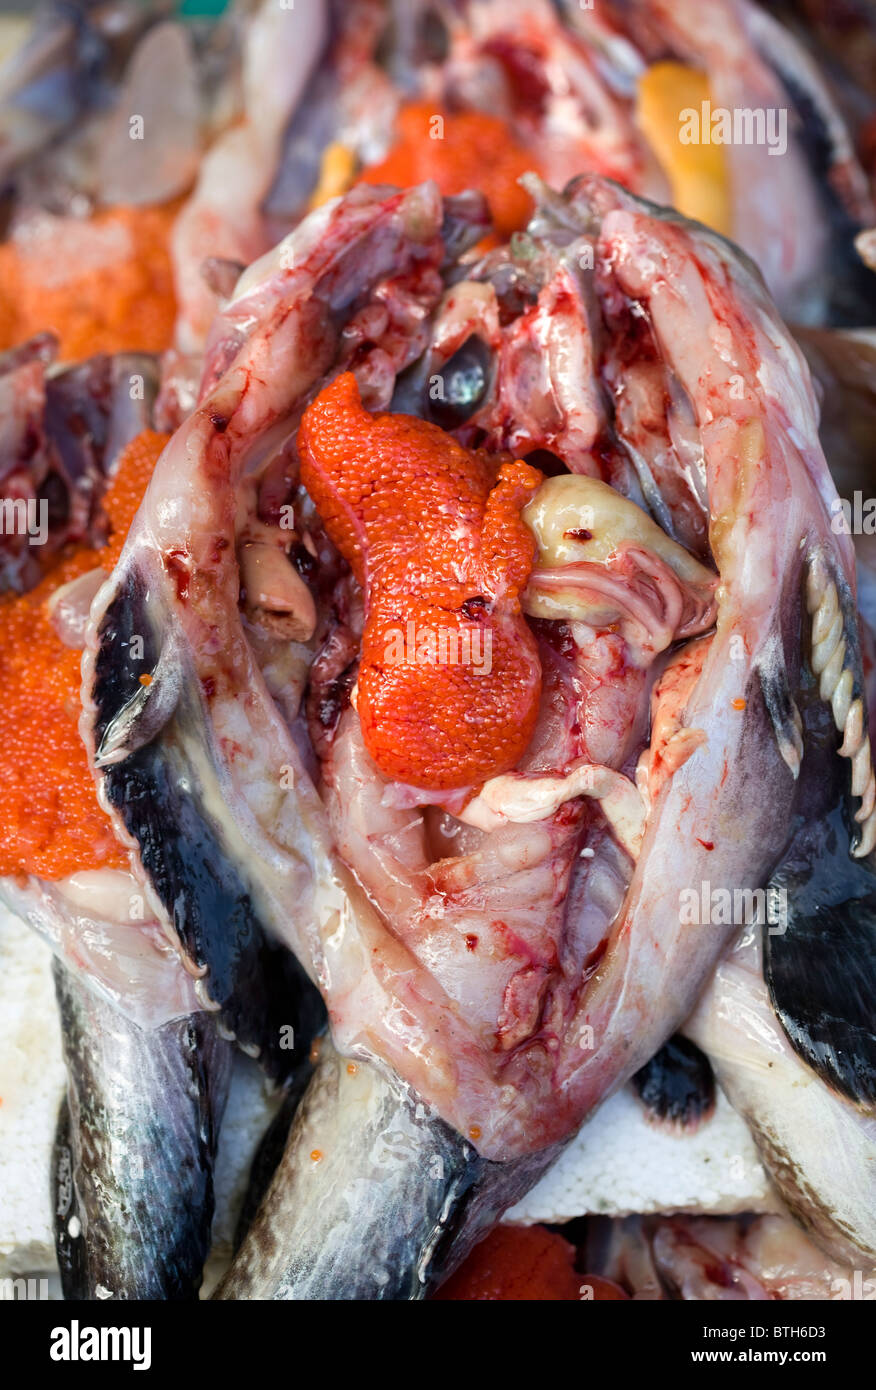 Monk Fish Roe on display in market Stock Photo